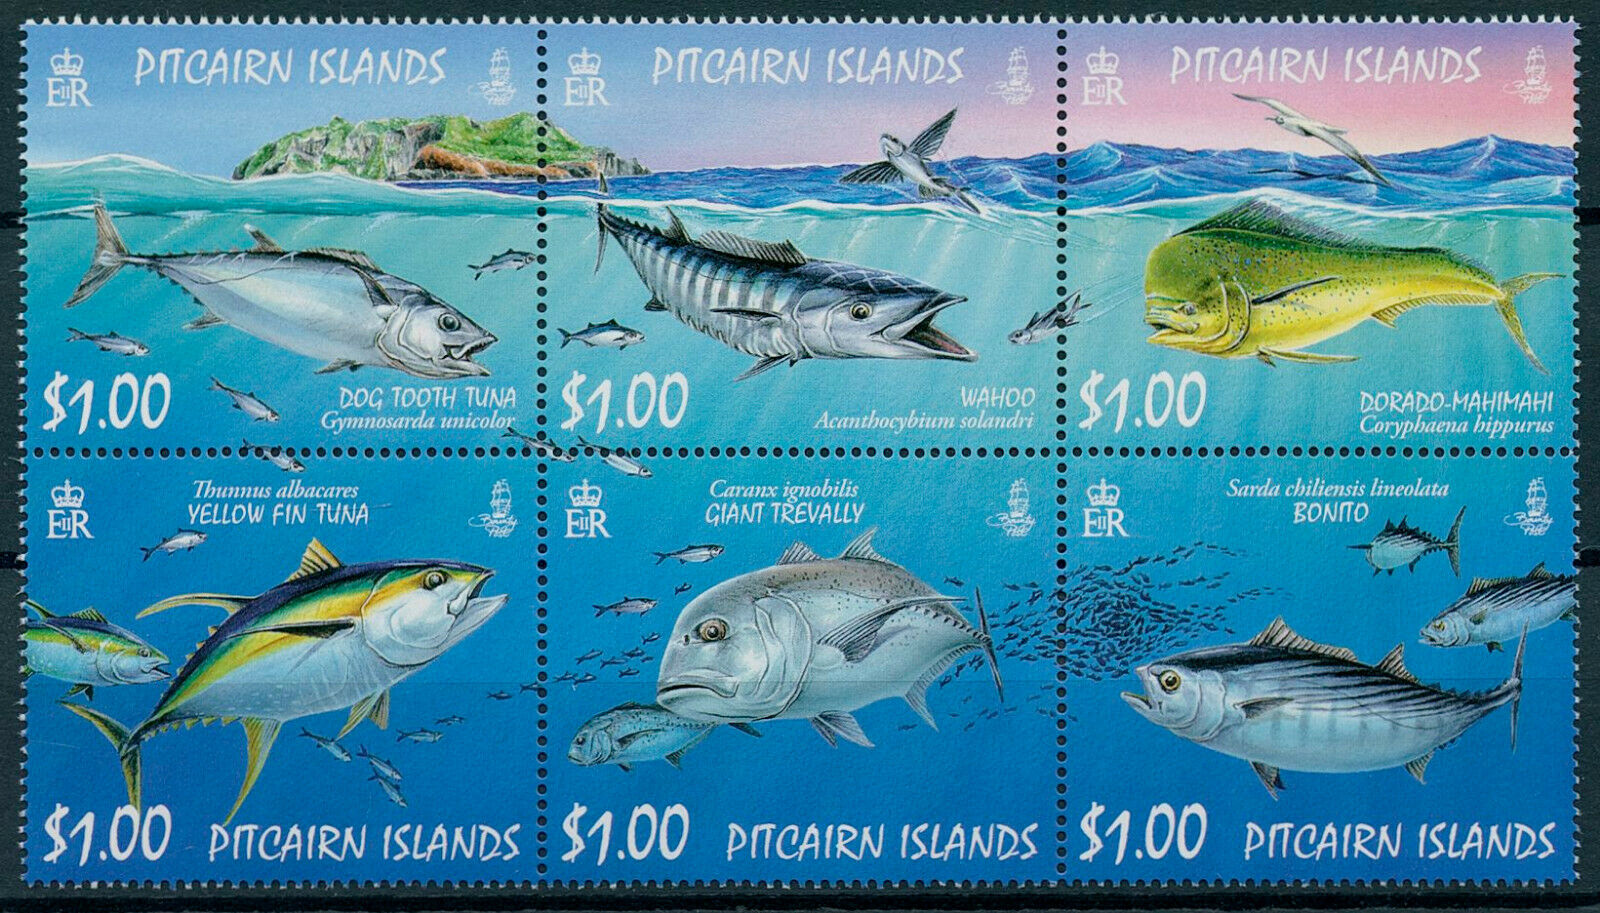 Pitcairn Islands 2007 MNH Fishes Stamps Ocean Fish Tuna Giant Trevally 6v Block